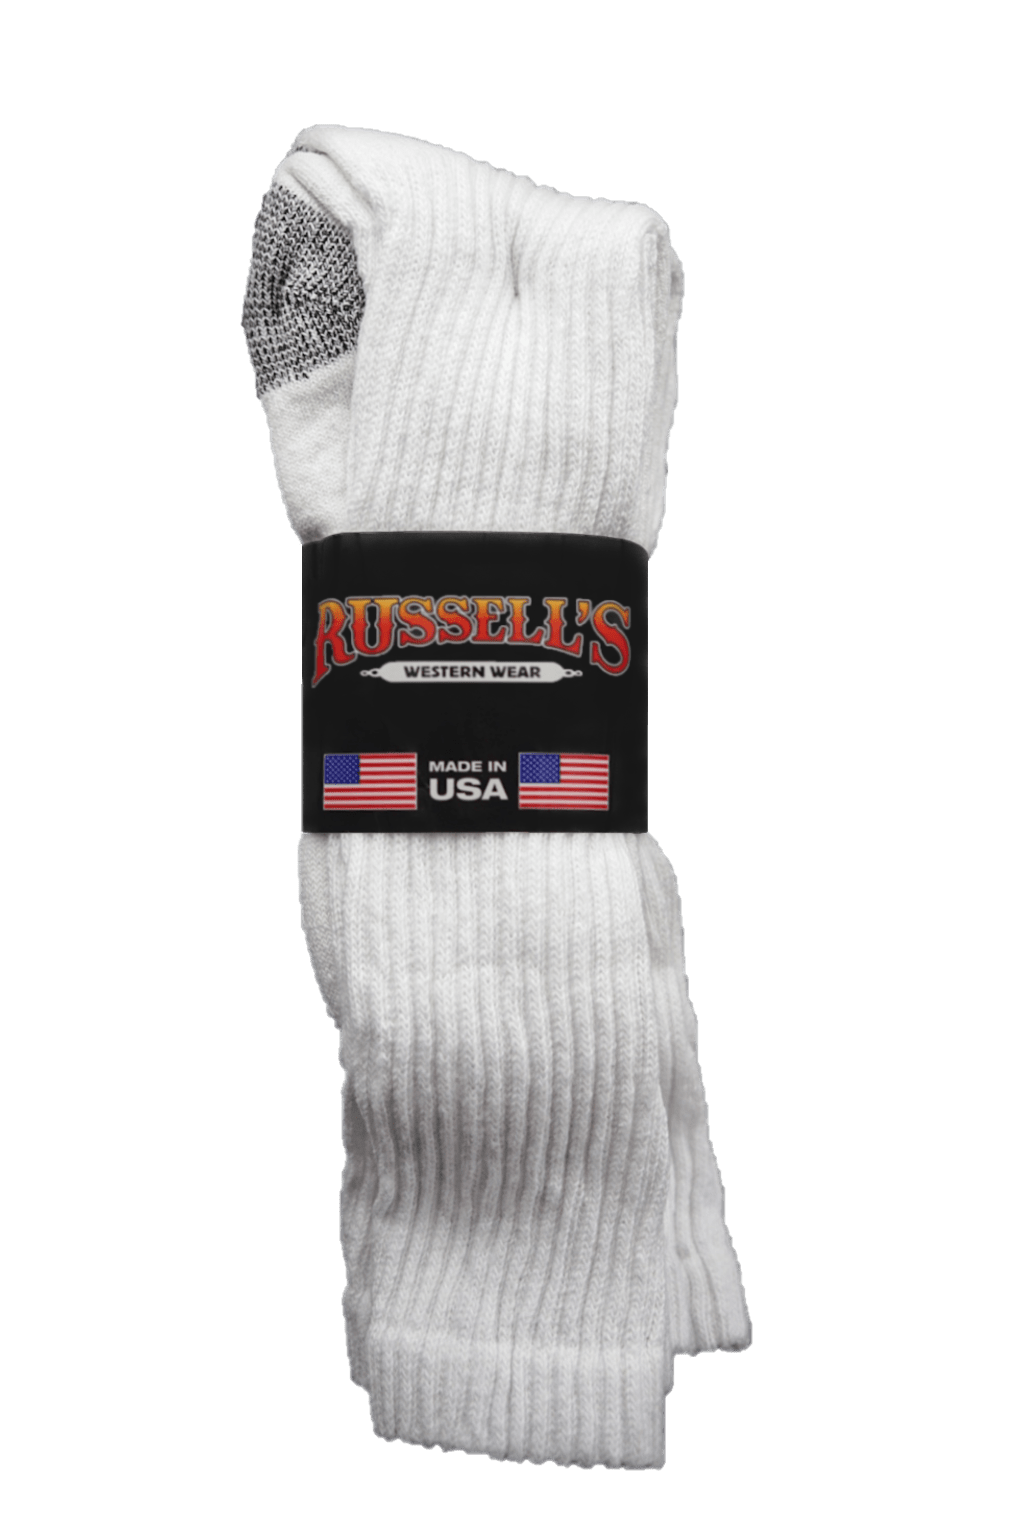 Taylor Hosiery Sales Accessories Russell's Branded Over the Calf Men's Socks (3 Pack) - 6044/3